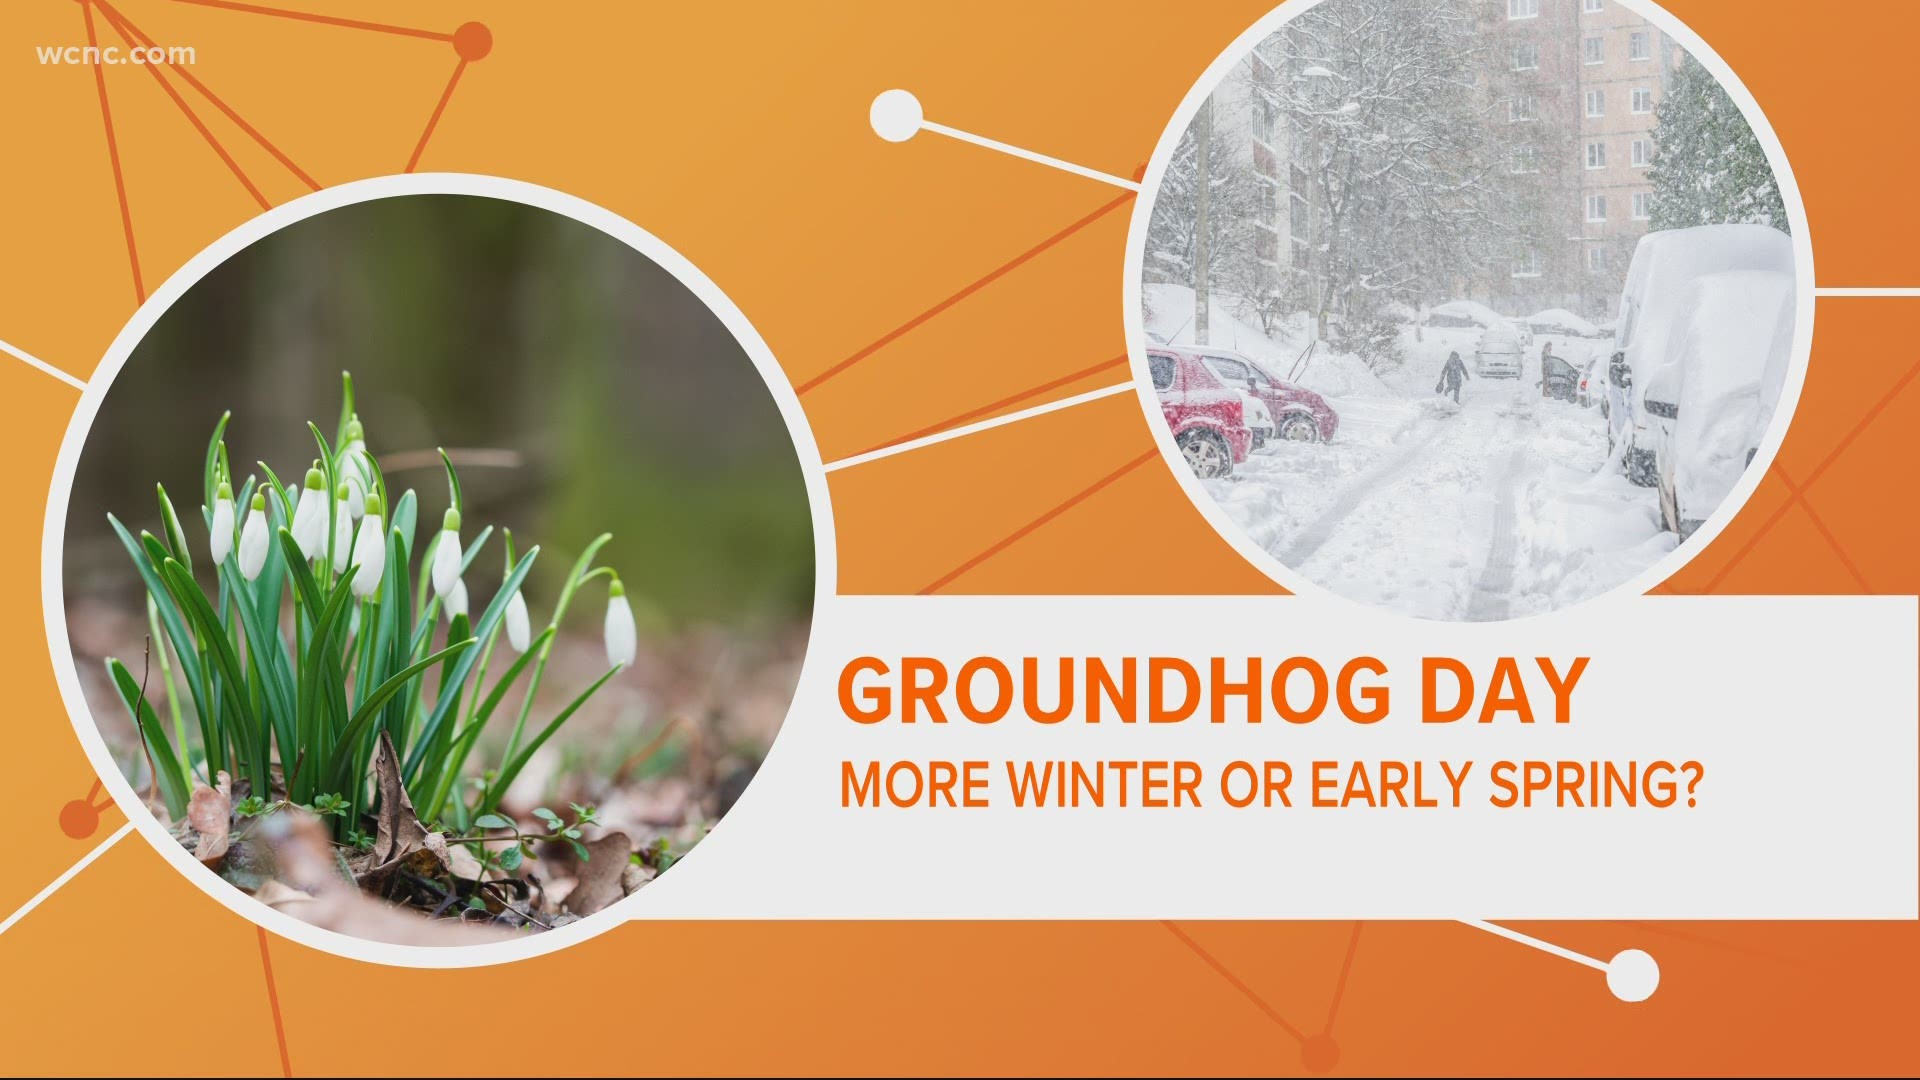 Tuesday is Groundhog Day, a time-honored tradition of trying to predict the arrival of spring. But just how accurate are those beloved groundhogs?